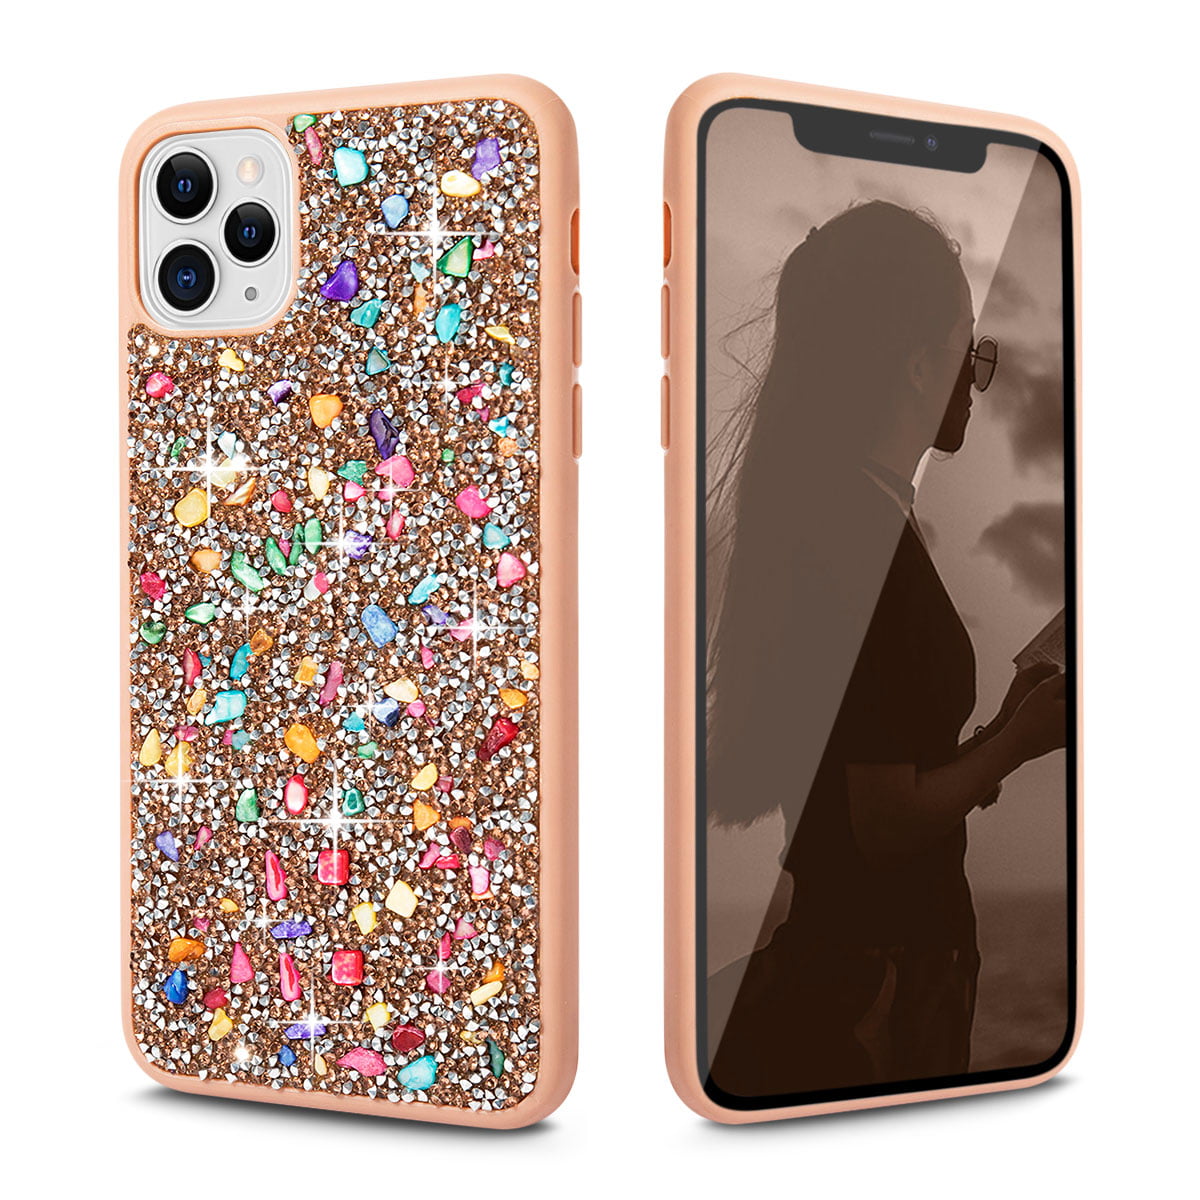 Iphone 11 Pro Max Cover Case Pakistan - iPhone 11 Pro Max Case, ZHIKE